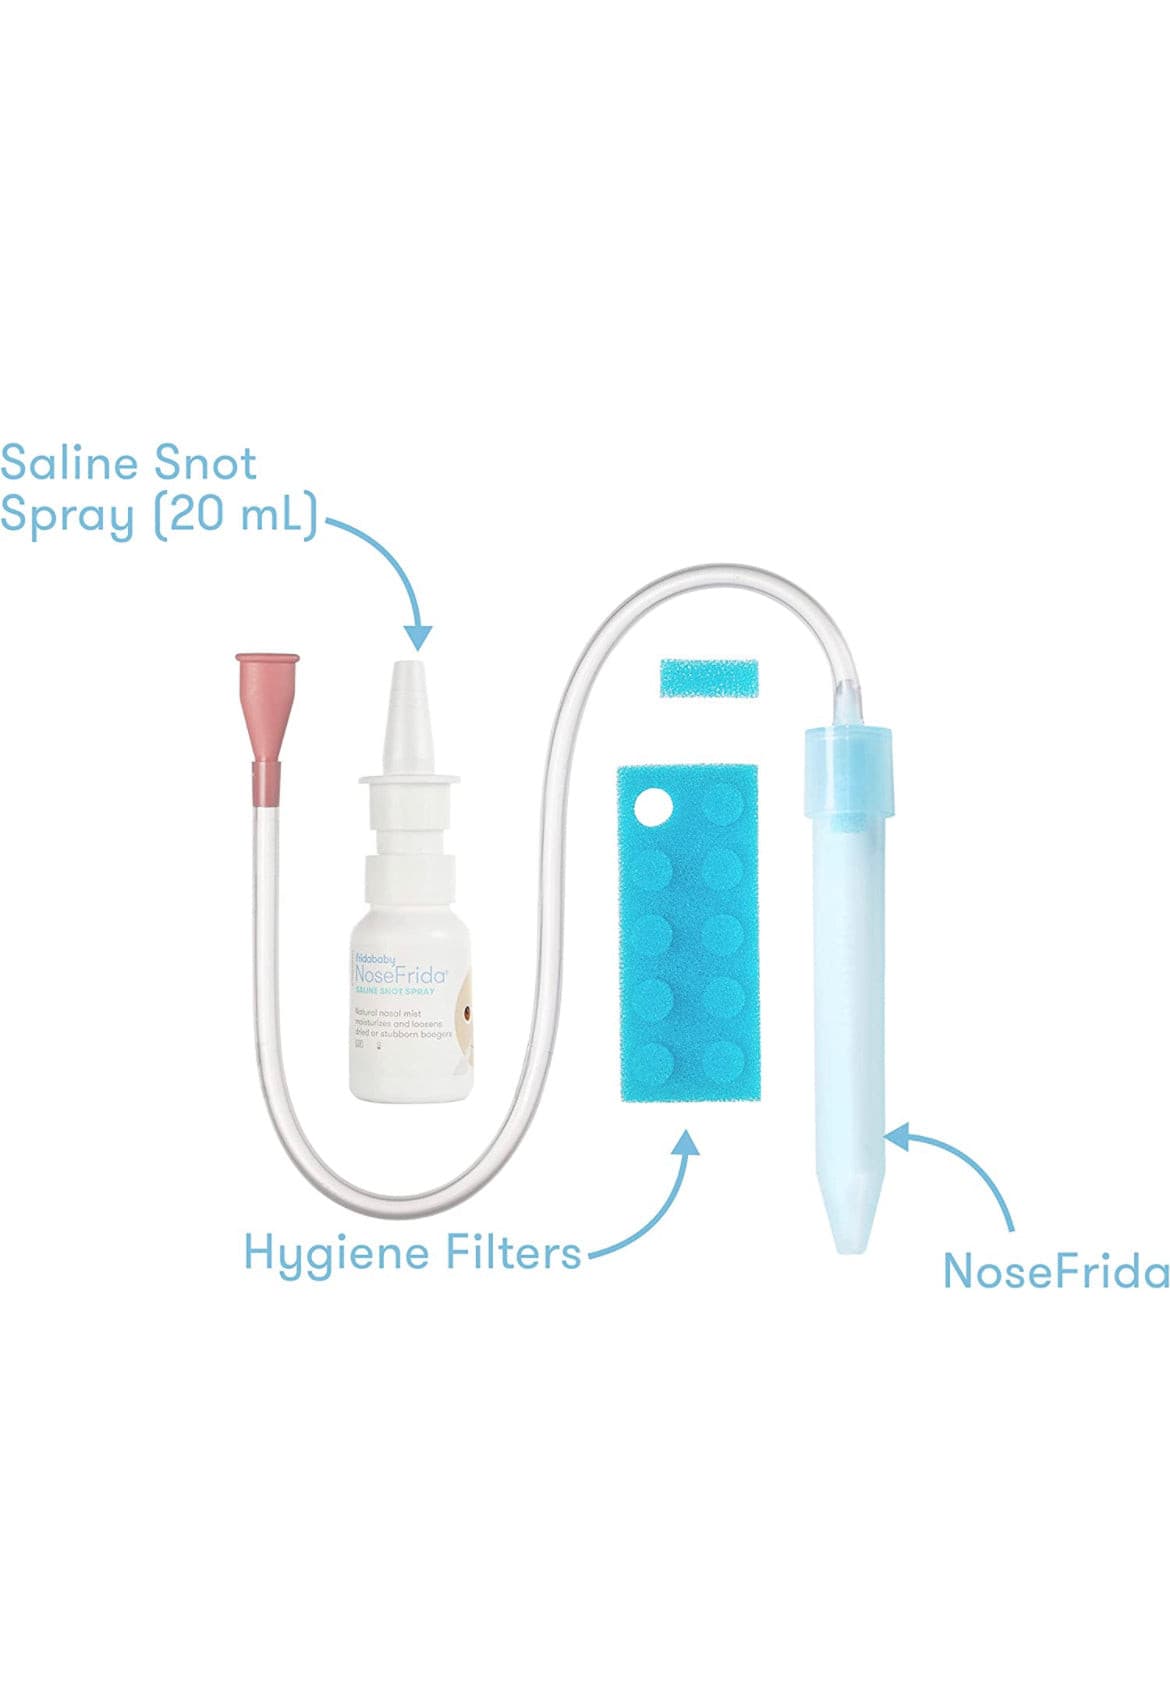 Baby Nasal Aspirator with 10 Extra Filters and All-Natural Saline Nasal Spray by Frida Baby.